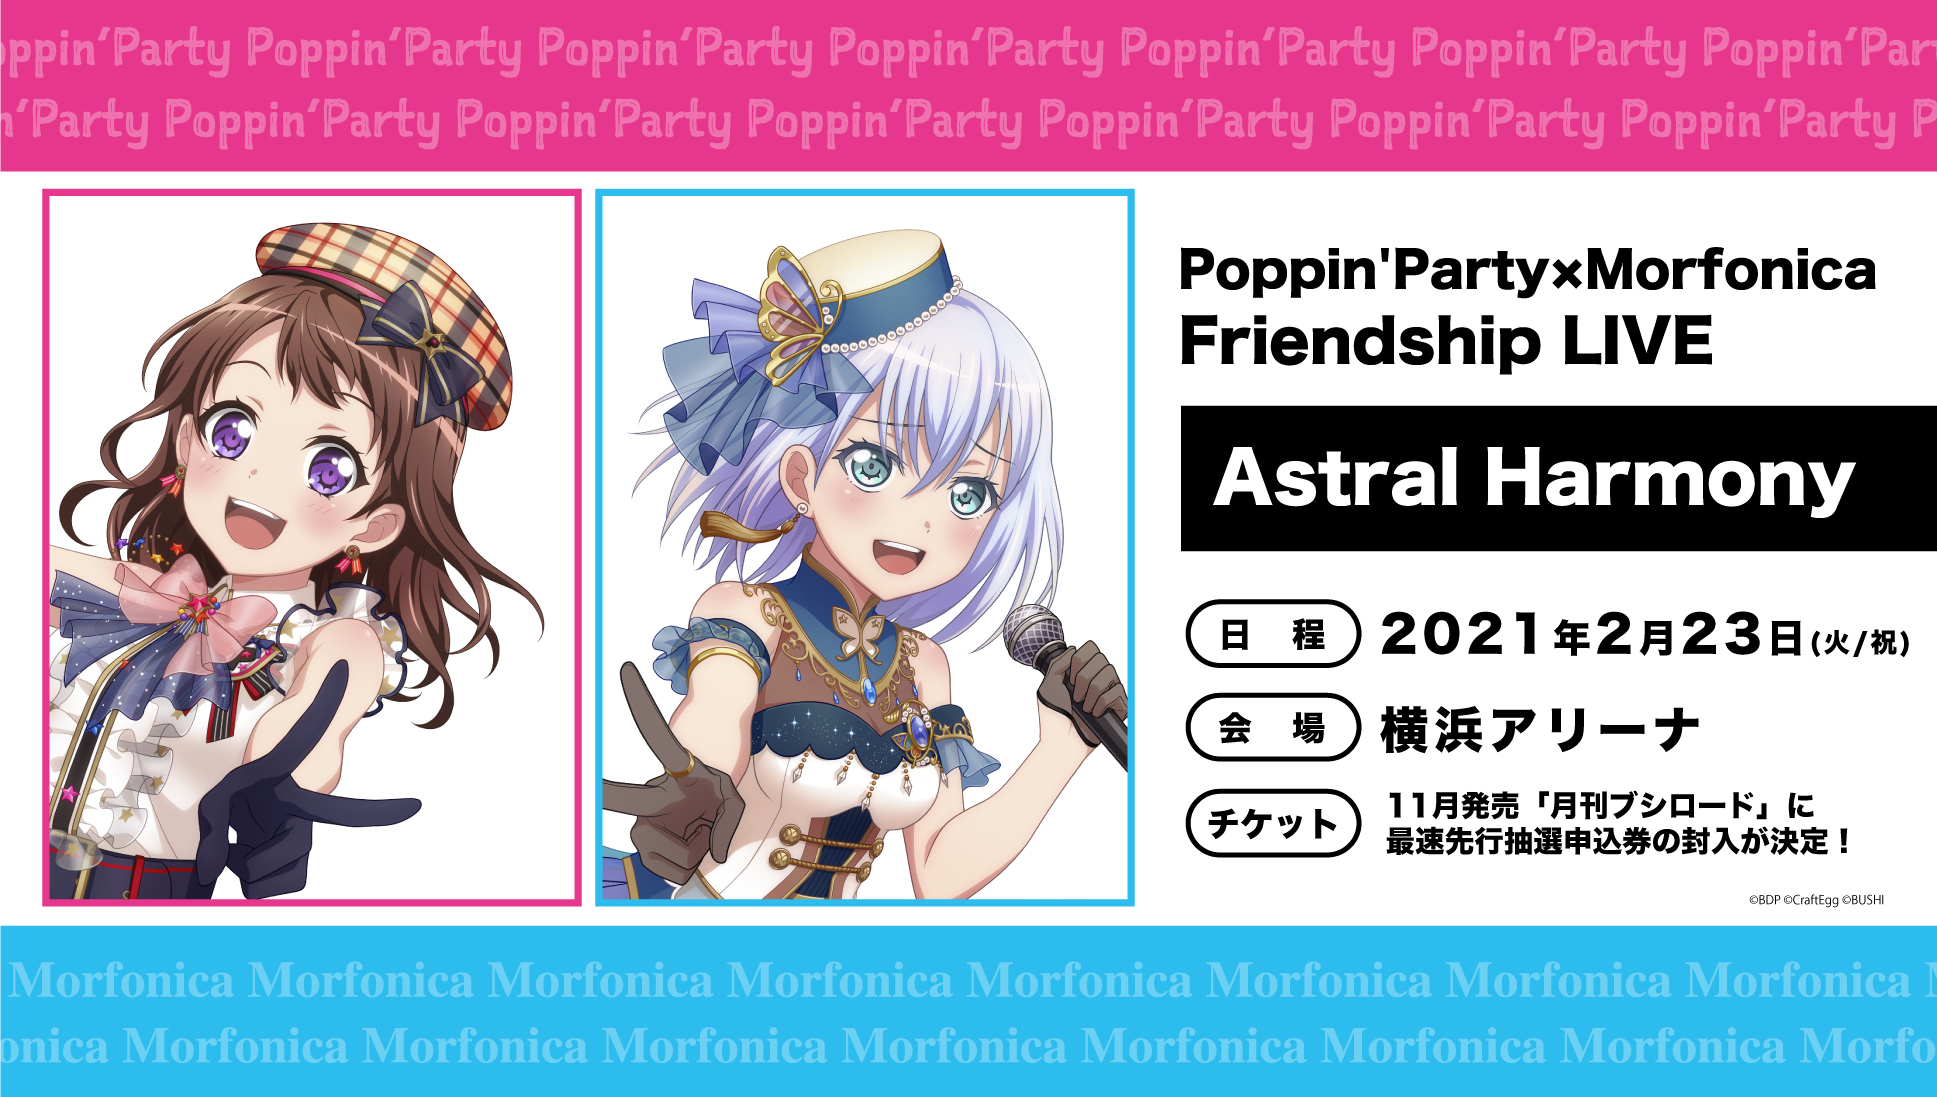 Poppin’Party×Morfonica Friendship LIVE「Astral Harmony」